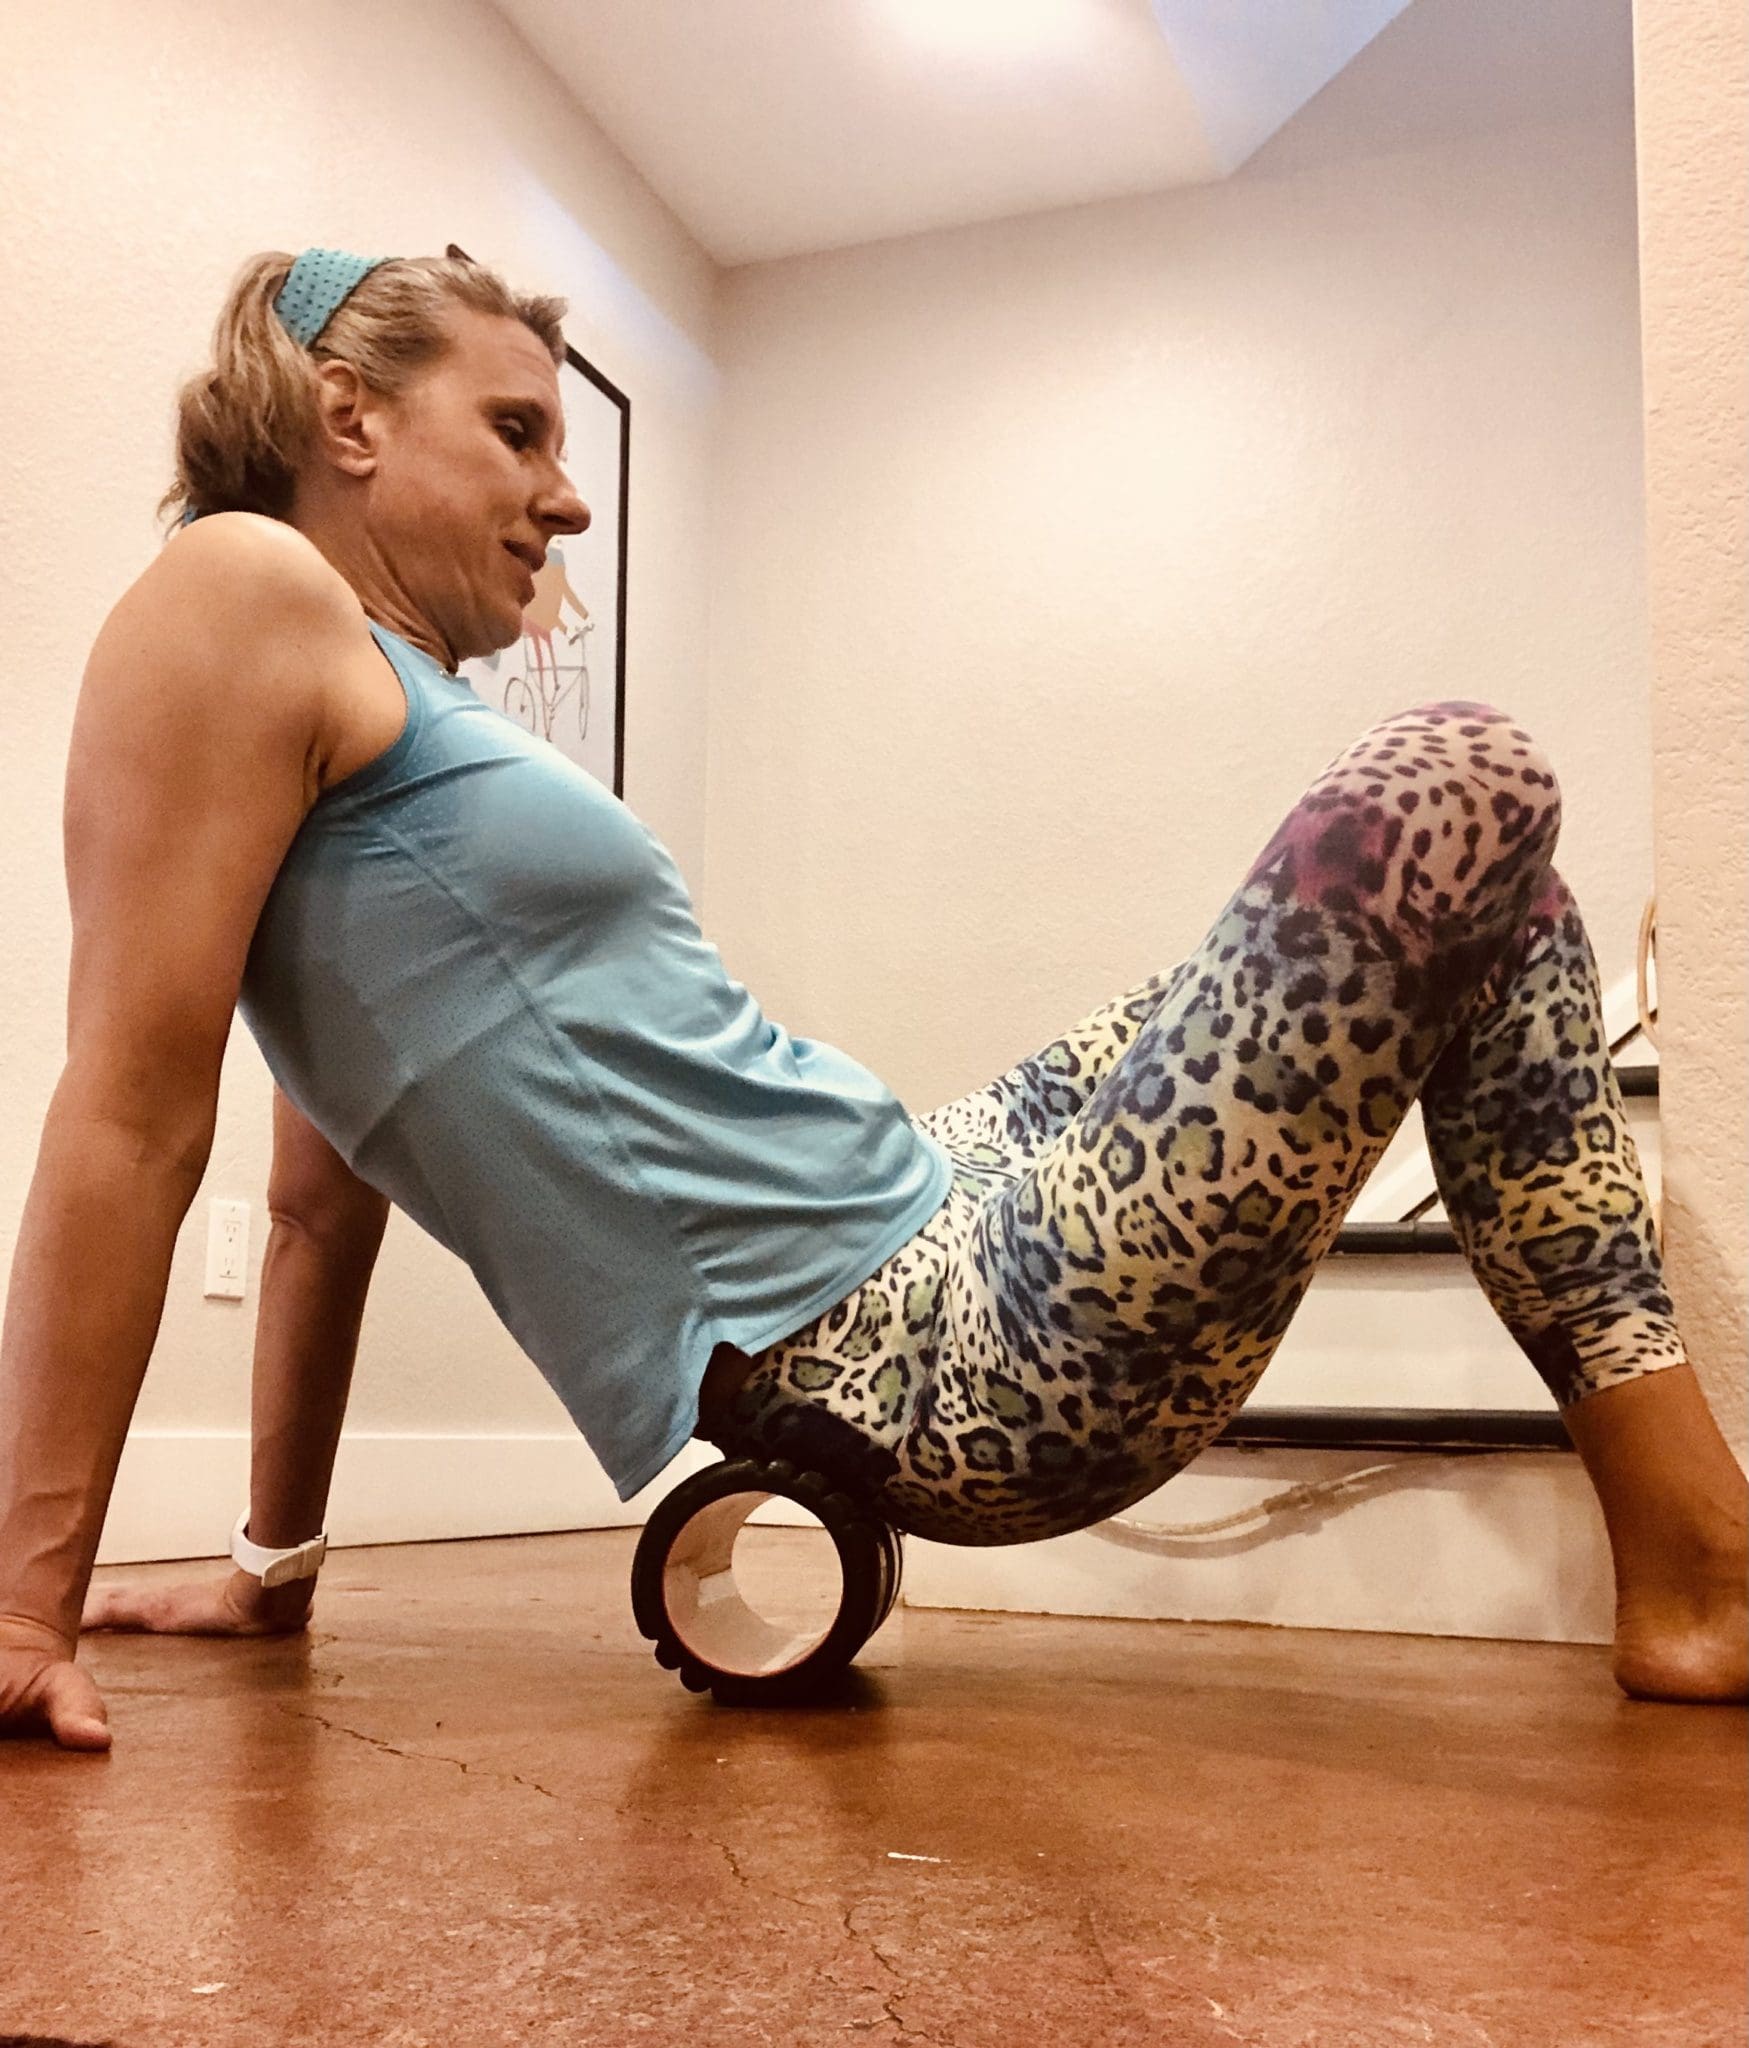 Pec Foam Rolling: Video Exercise Guide & Tips